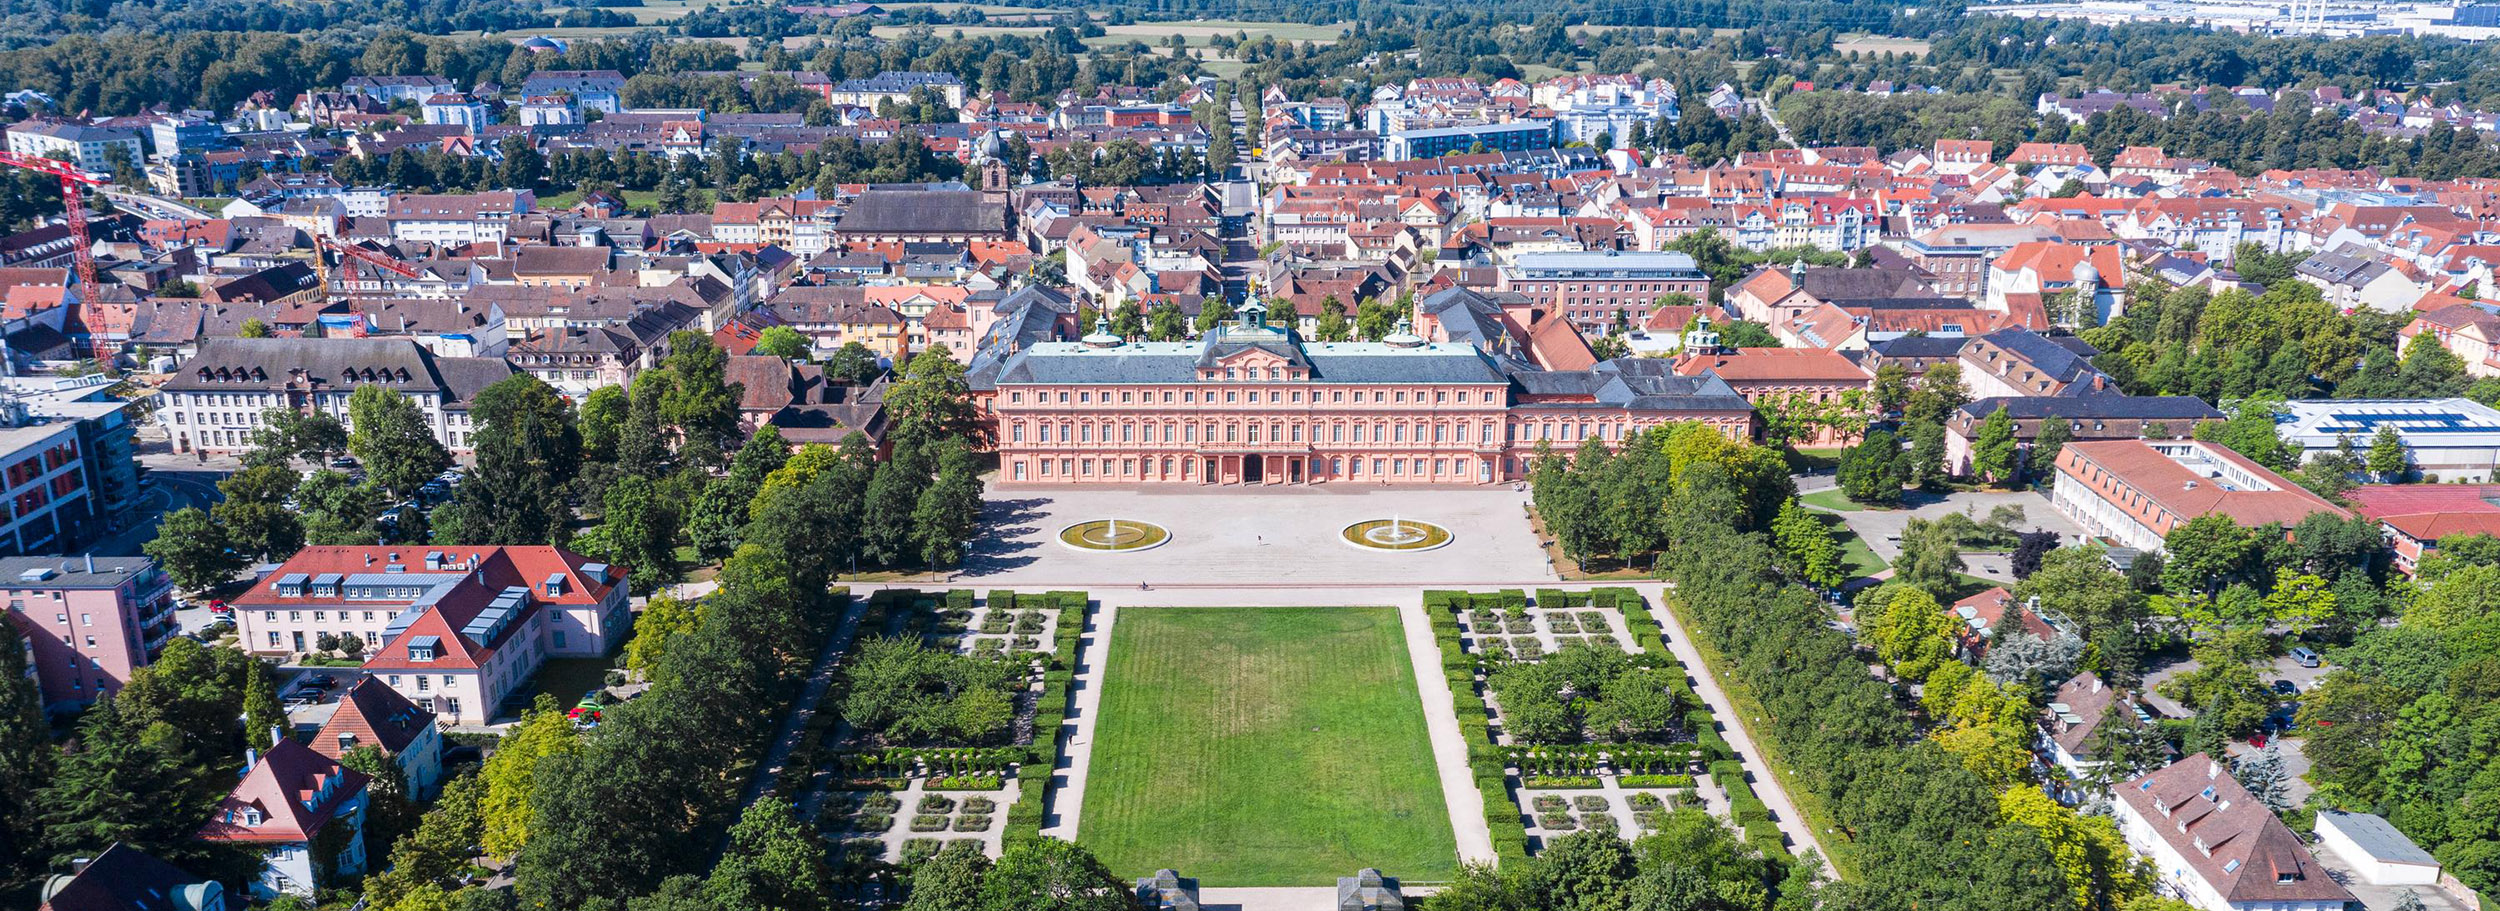 Aerial view of Rastatt Castle in the foreground and houses